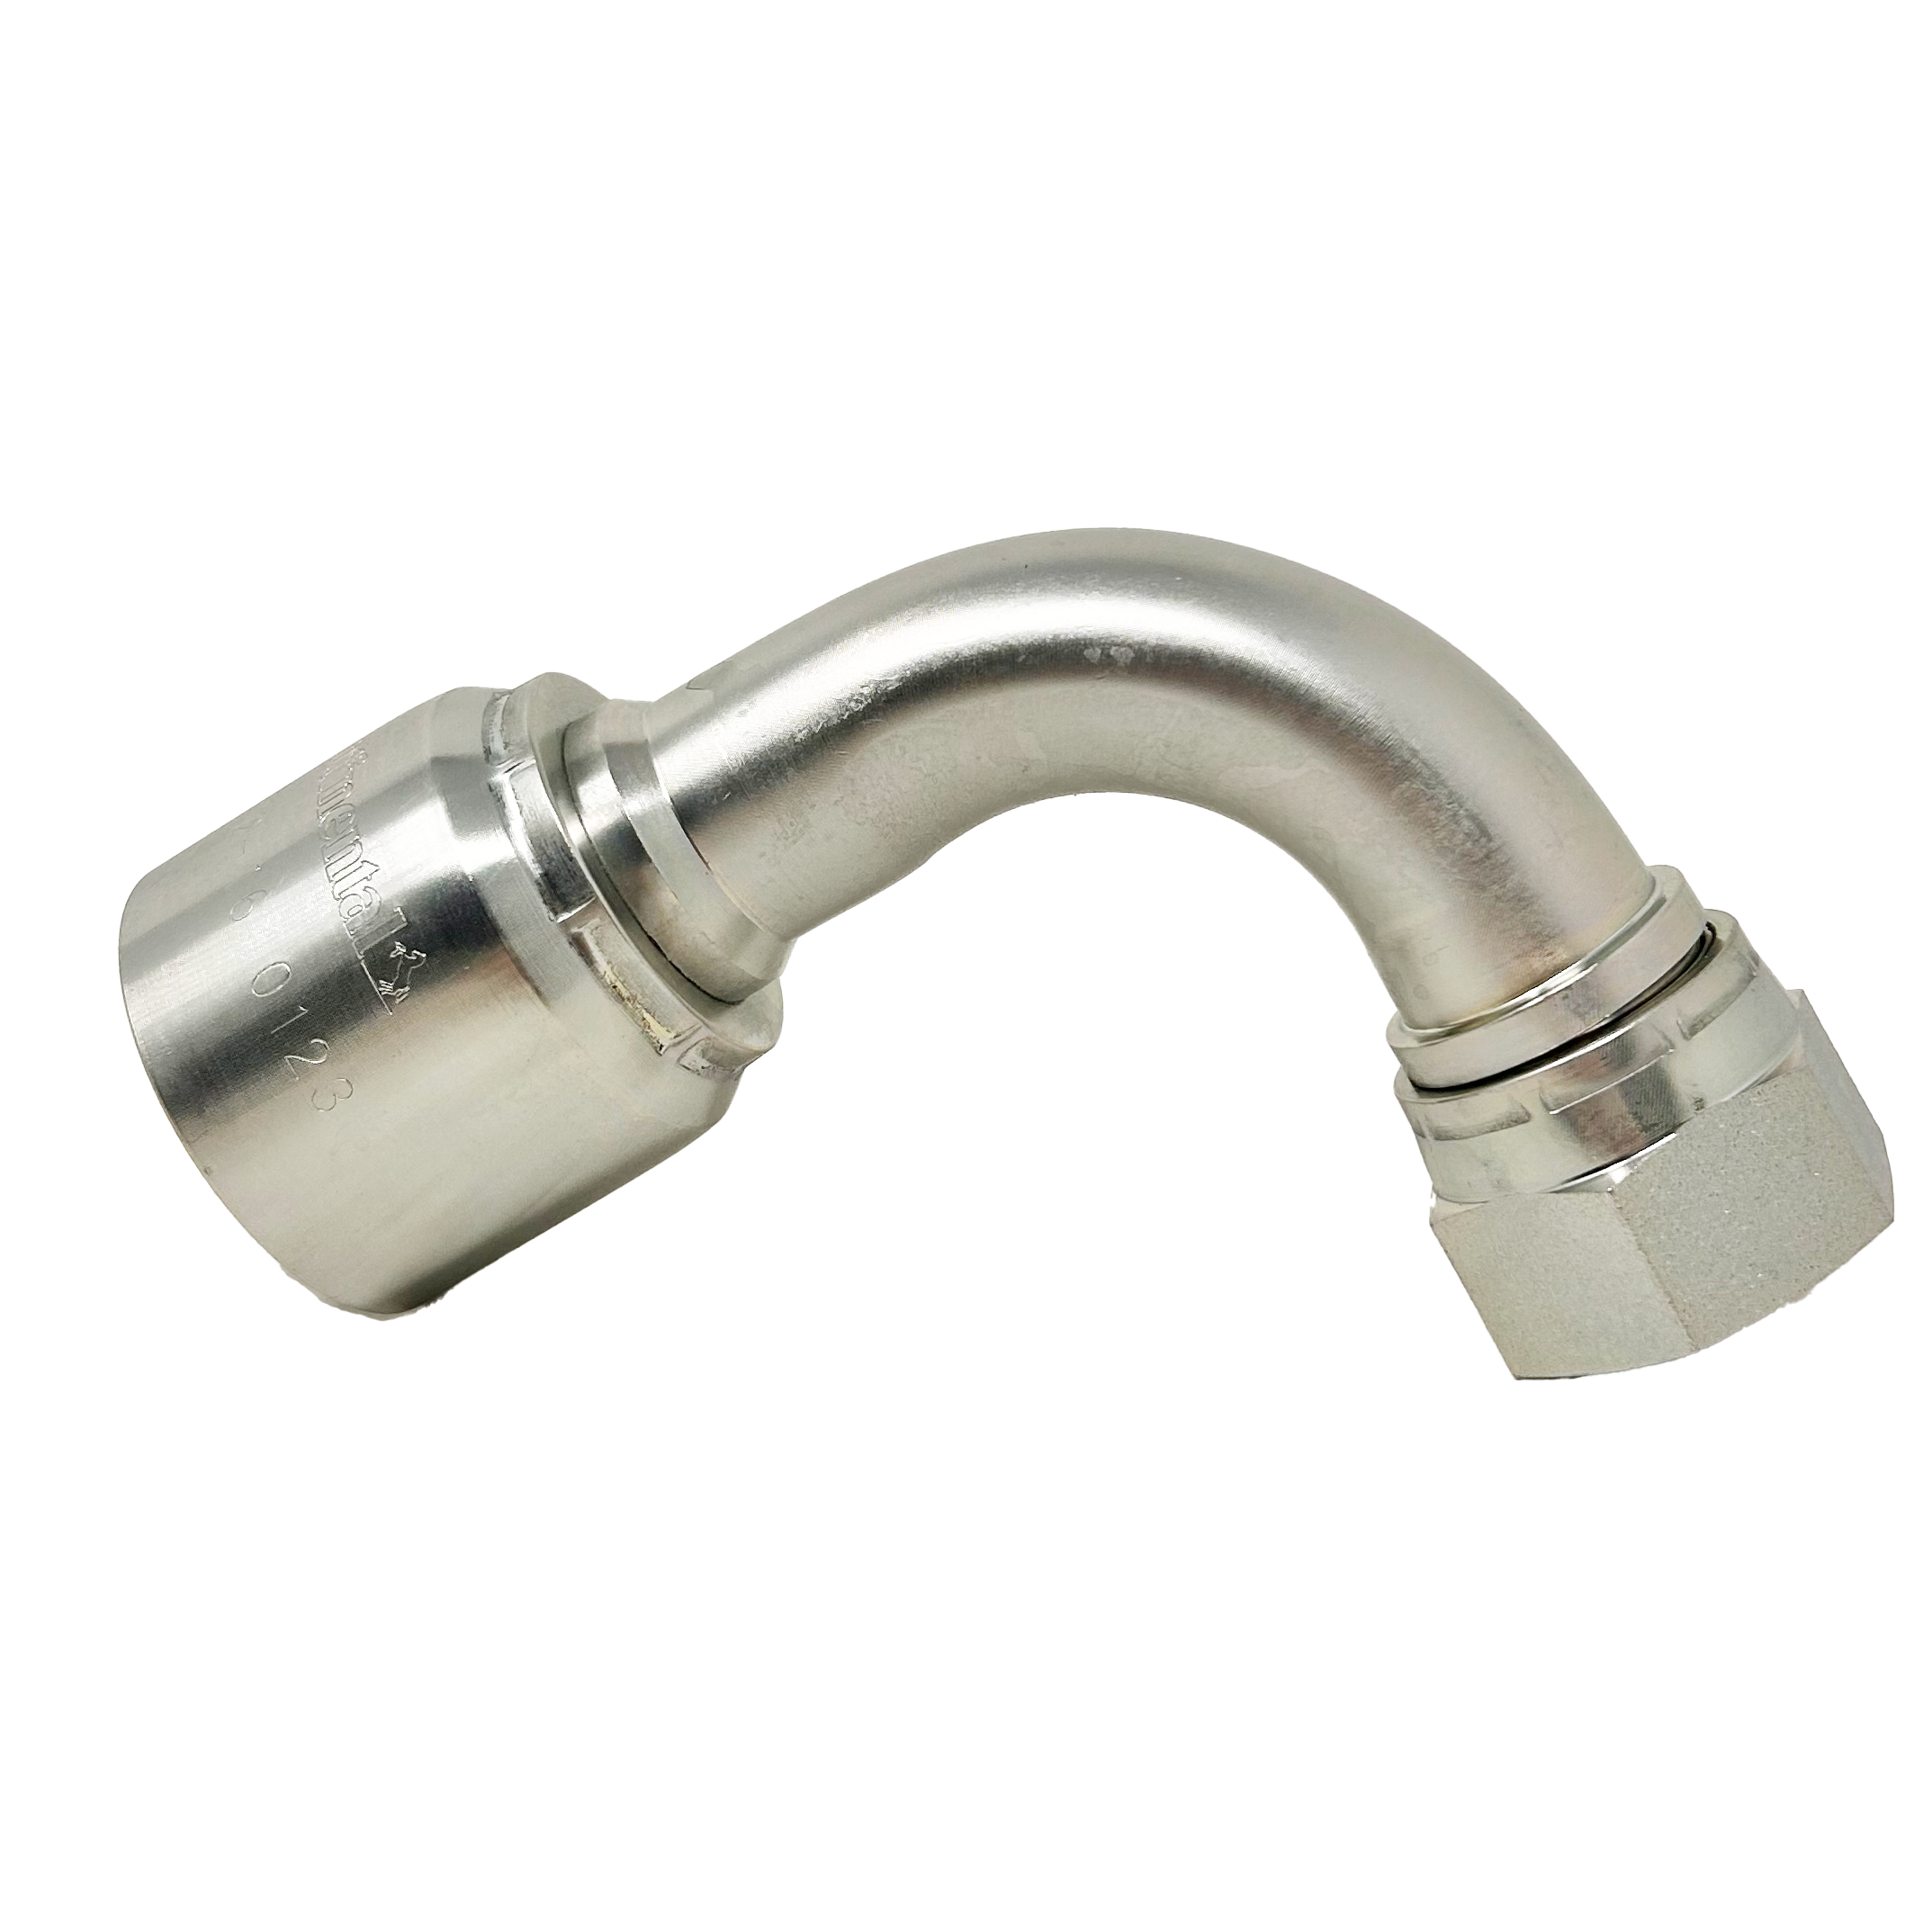 B2-JCFX90-0604S: Continental Hose Fitting, 0.375 (3/8") Hose ID x 7/16-20 Female JIC, 90-Degree Swivel Connection